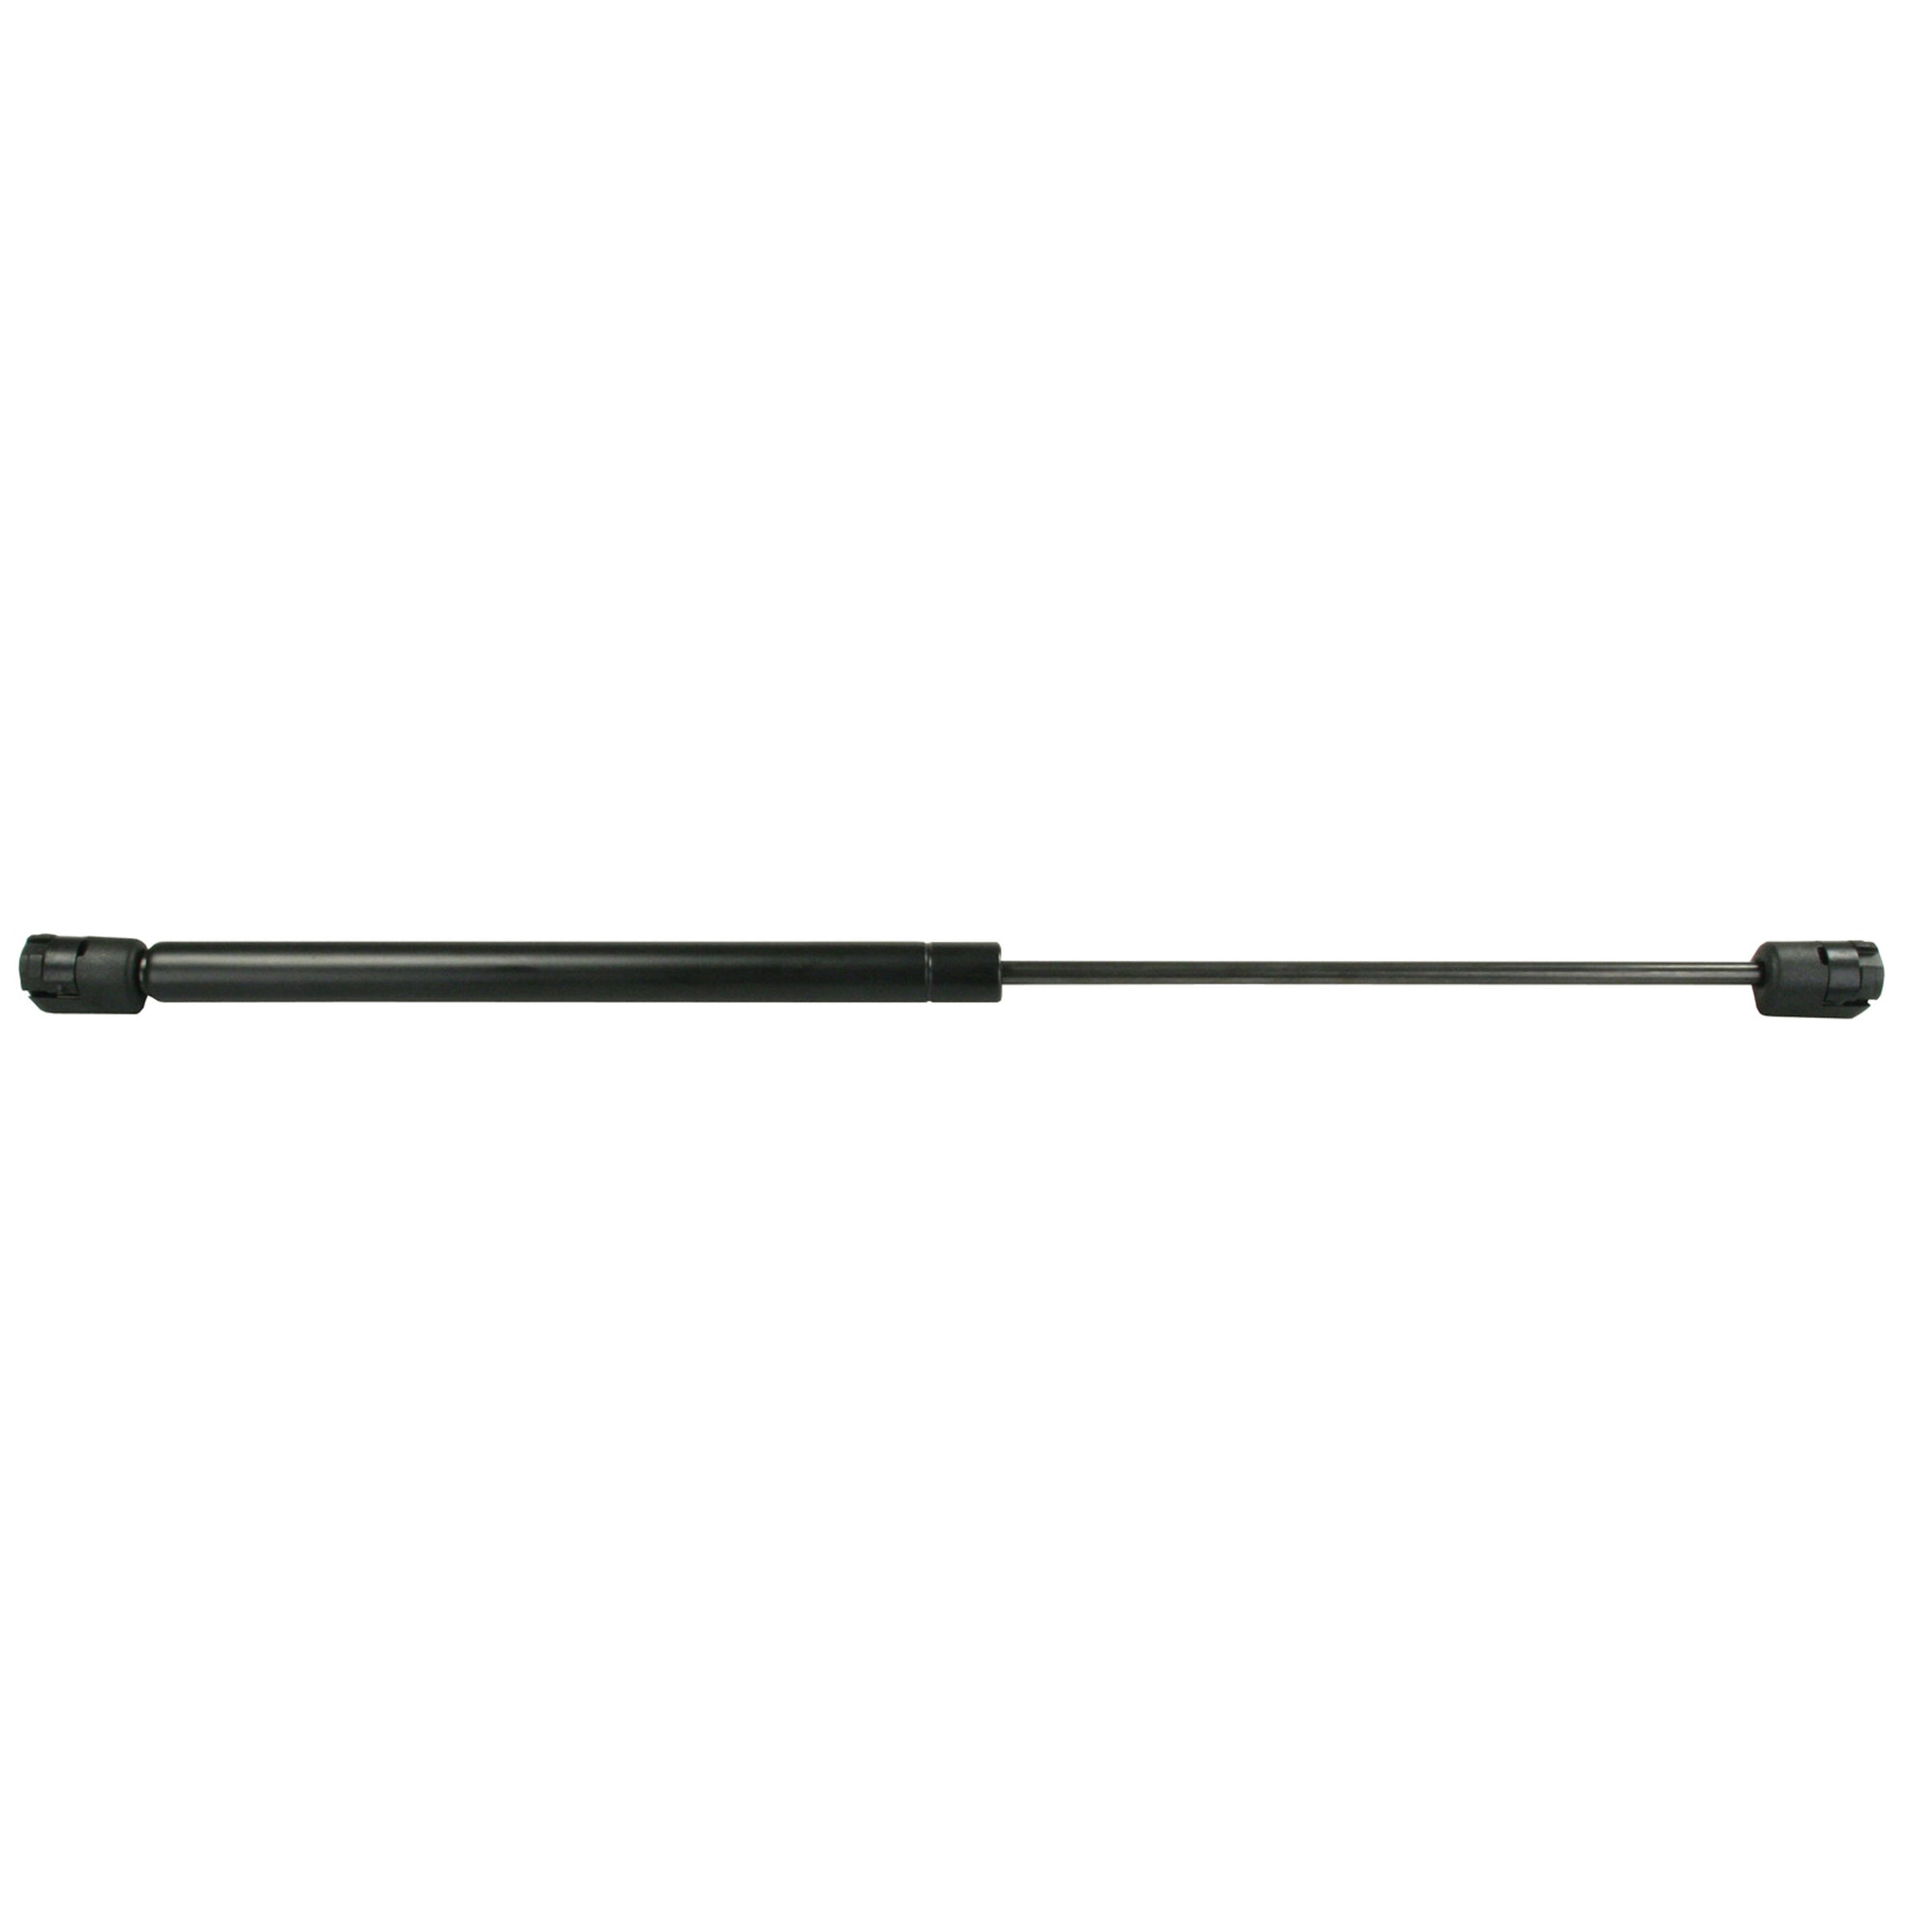 JR Products GSNI-4983-35 Gas Spring